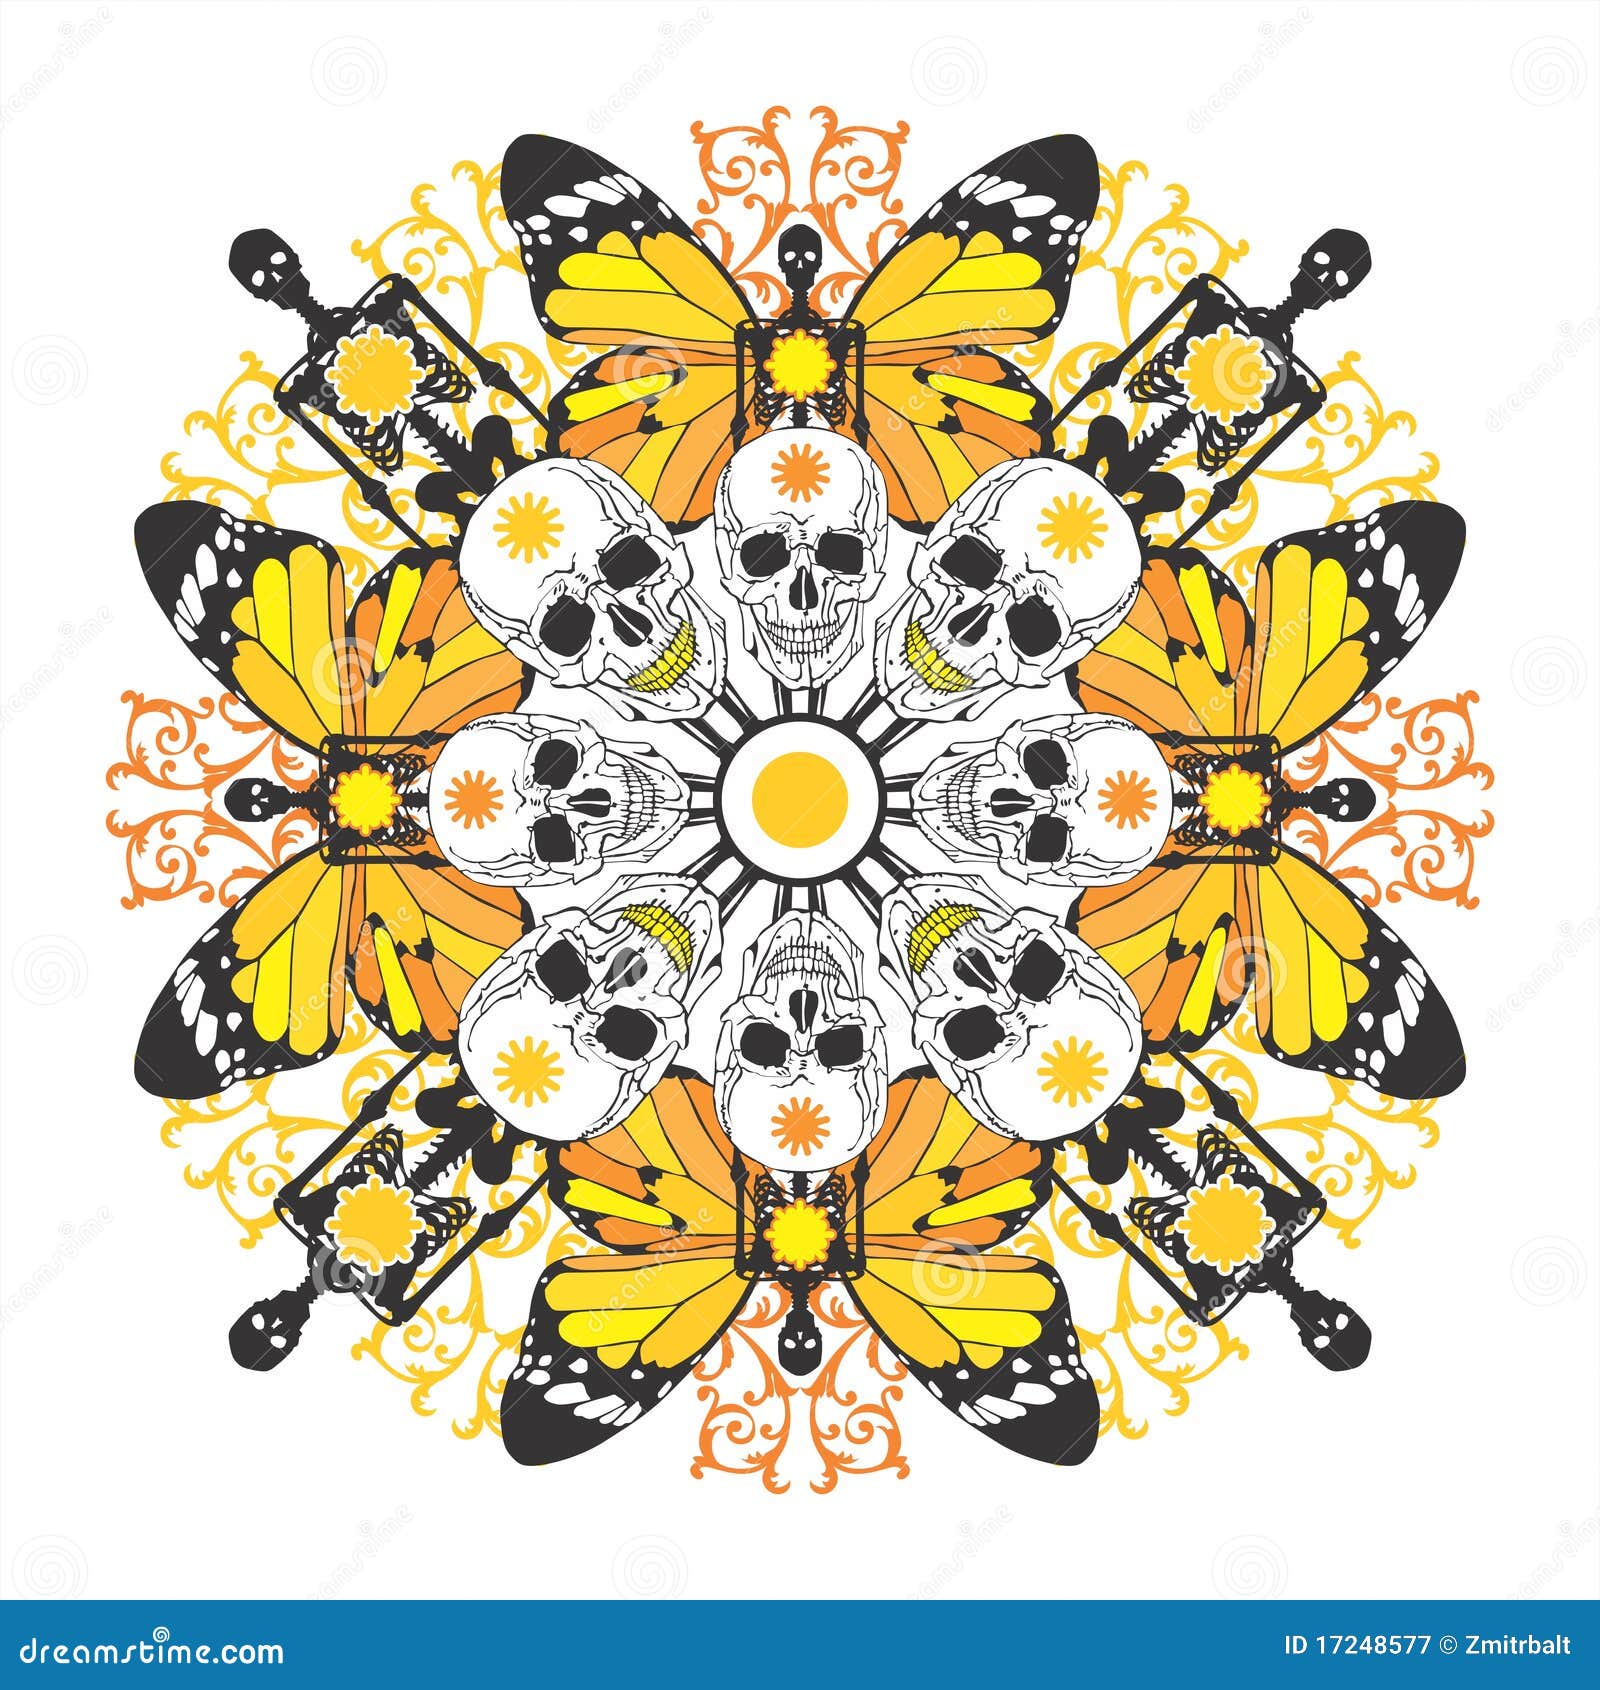 interesting symmetric pattern with skulls and skel